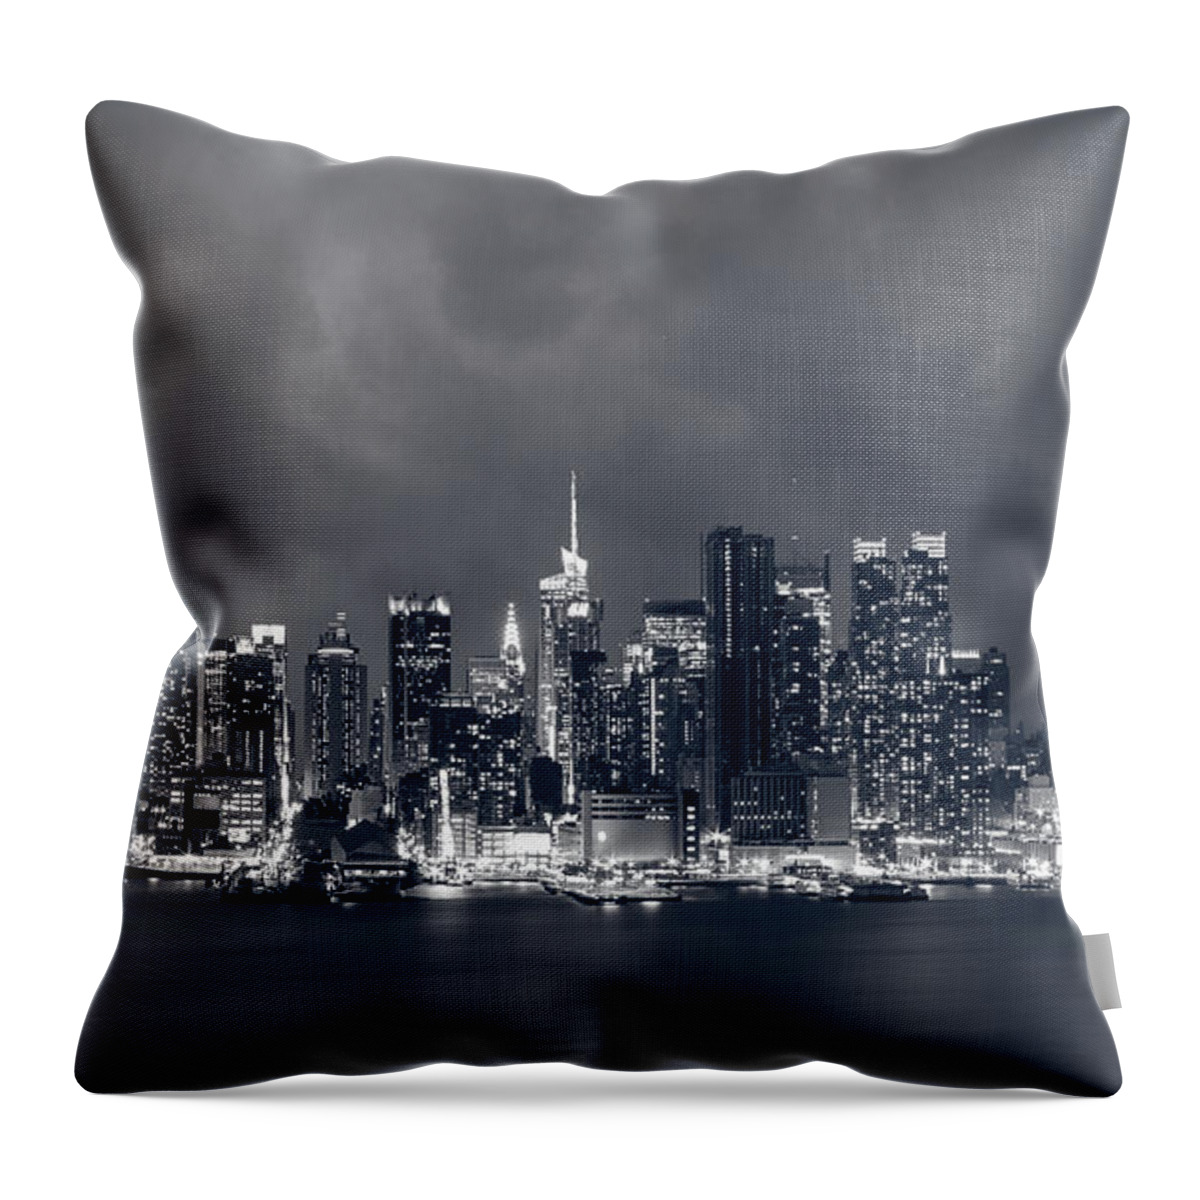 New York City Throw Pillow featuring the photograph Light Will Drive Out Darkness by Elvira Pinkhas